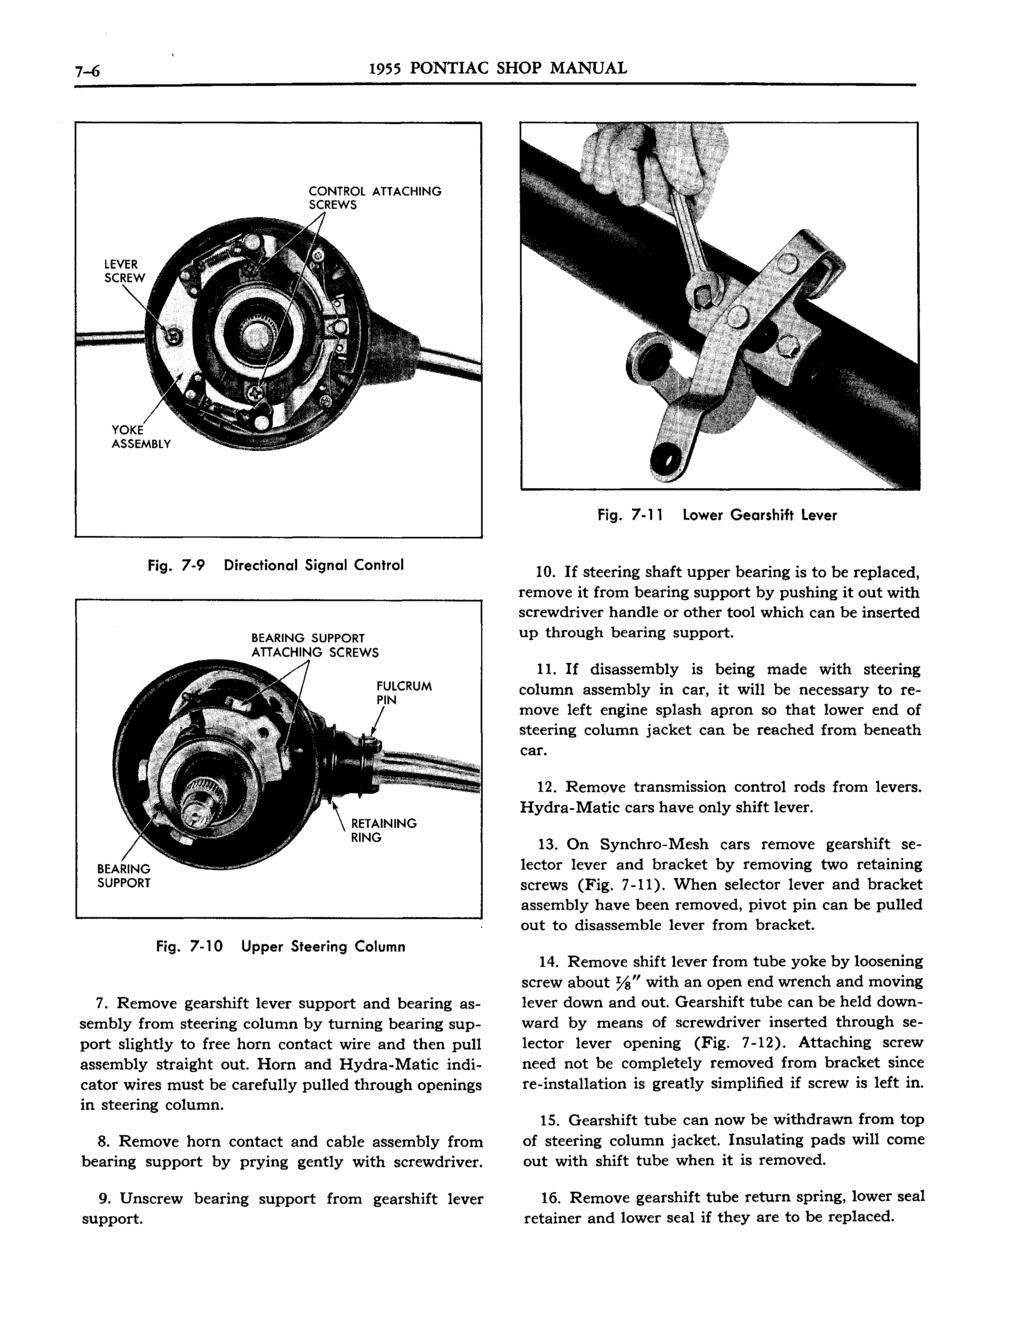 7-6 1955 PONTIAC SHOP MANUAL CONTROL ATTACHING YOKE ASSEMBLY Fig. 7-11 Lower Gearshift Lever Fig. 7-9 Directional Signal Control BEARING SUPPORT ATTACHING SCREWS 10.